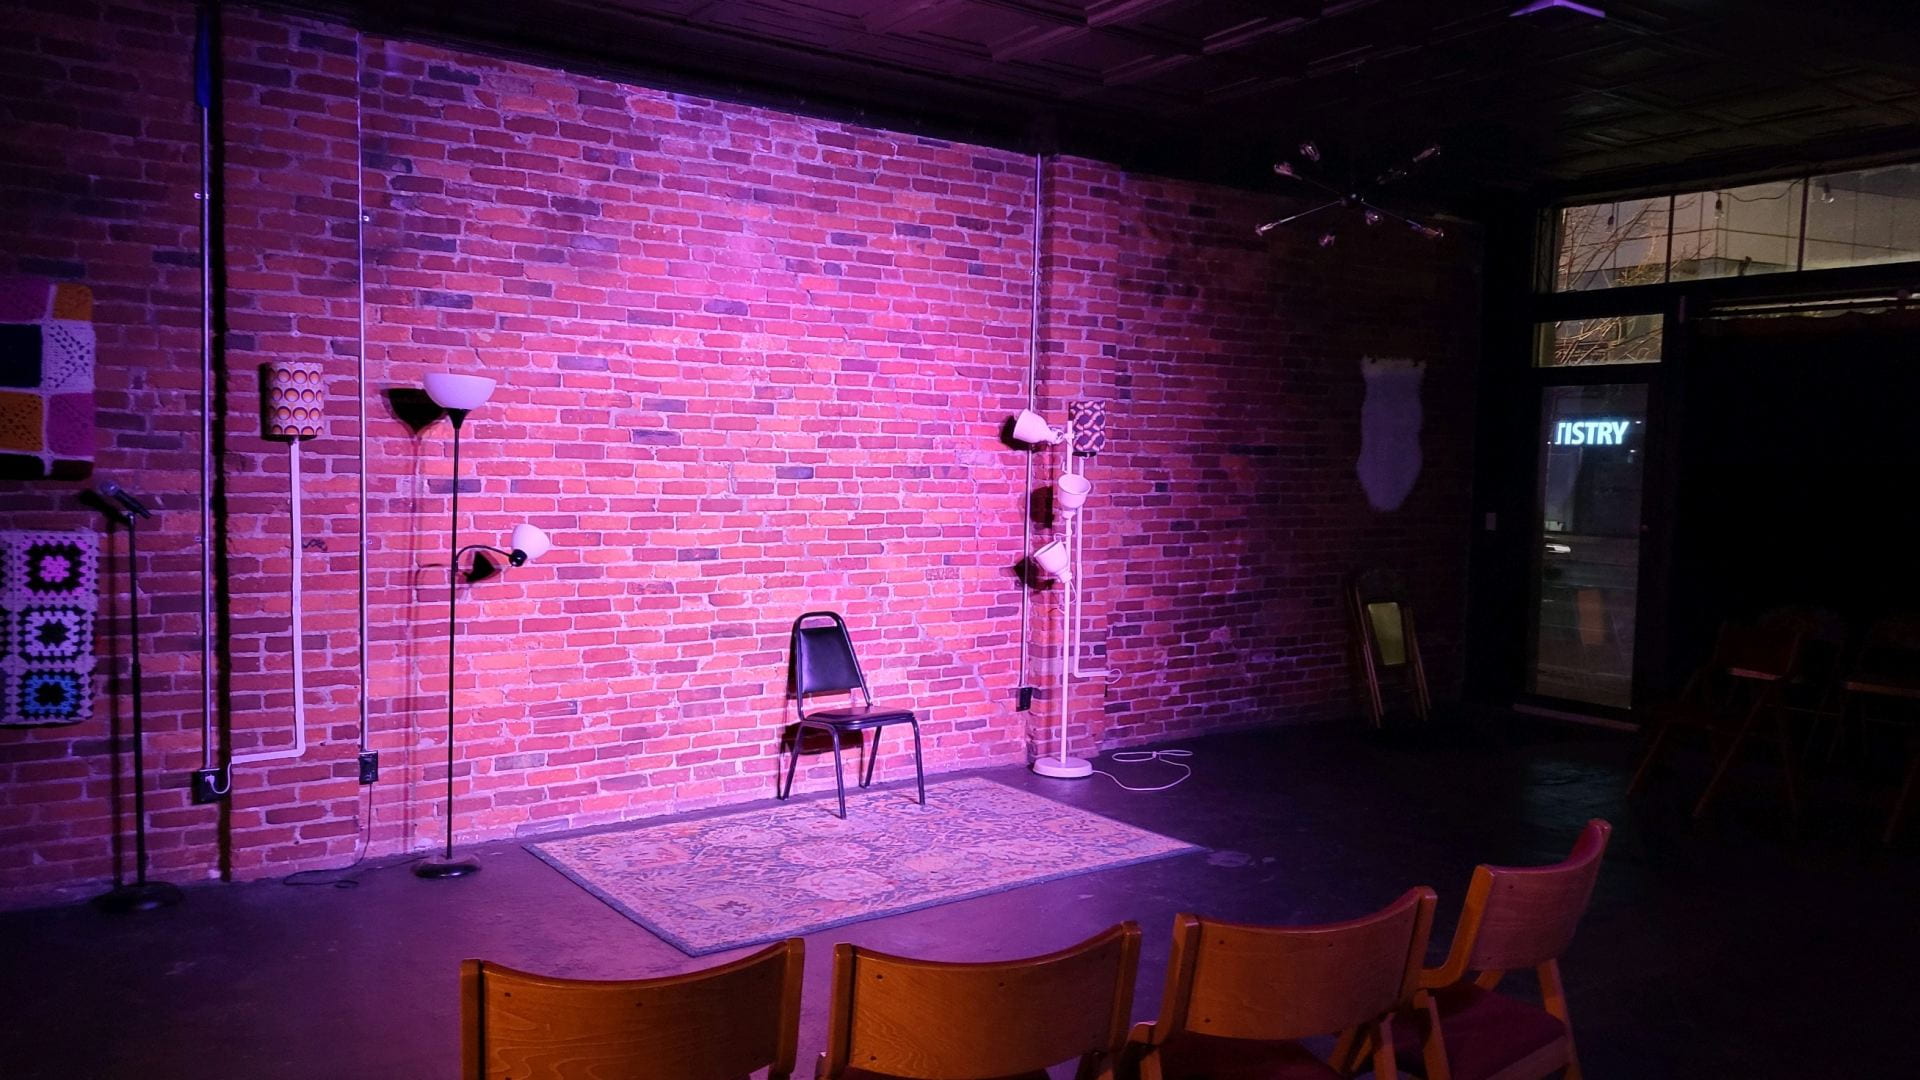 The stage is set for Hashtag Comedy Company to officially welcome visitors to their new studio located at 1253 N. High St. Credit: The Hashtag Comedy Company